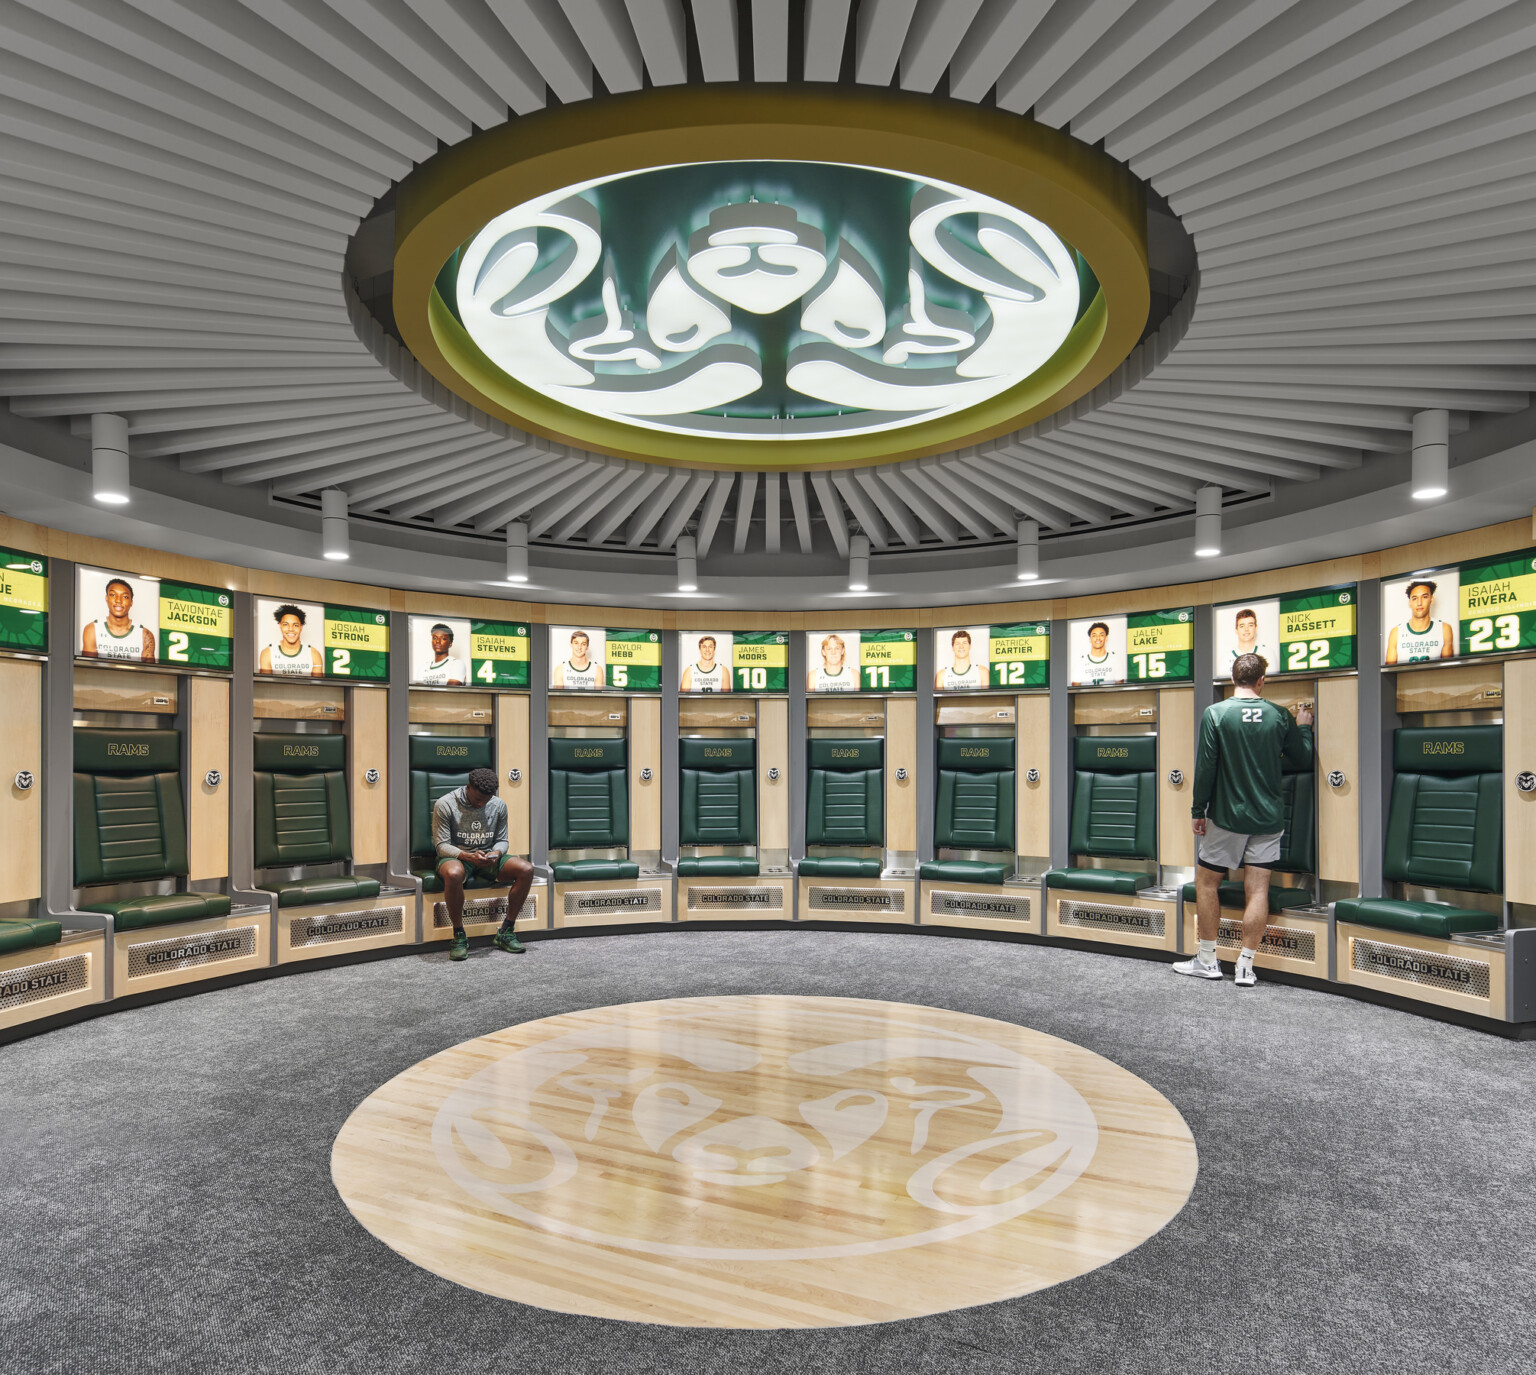 team branding, large Rams logo emblem adorns the ceiling, personalized lockers for the athletes with illuminated picture and jersey numbers of each athletes locker with private seating